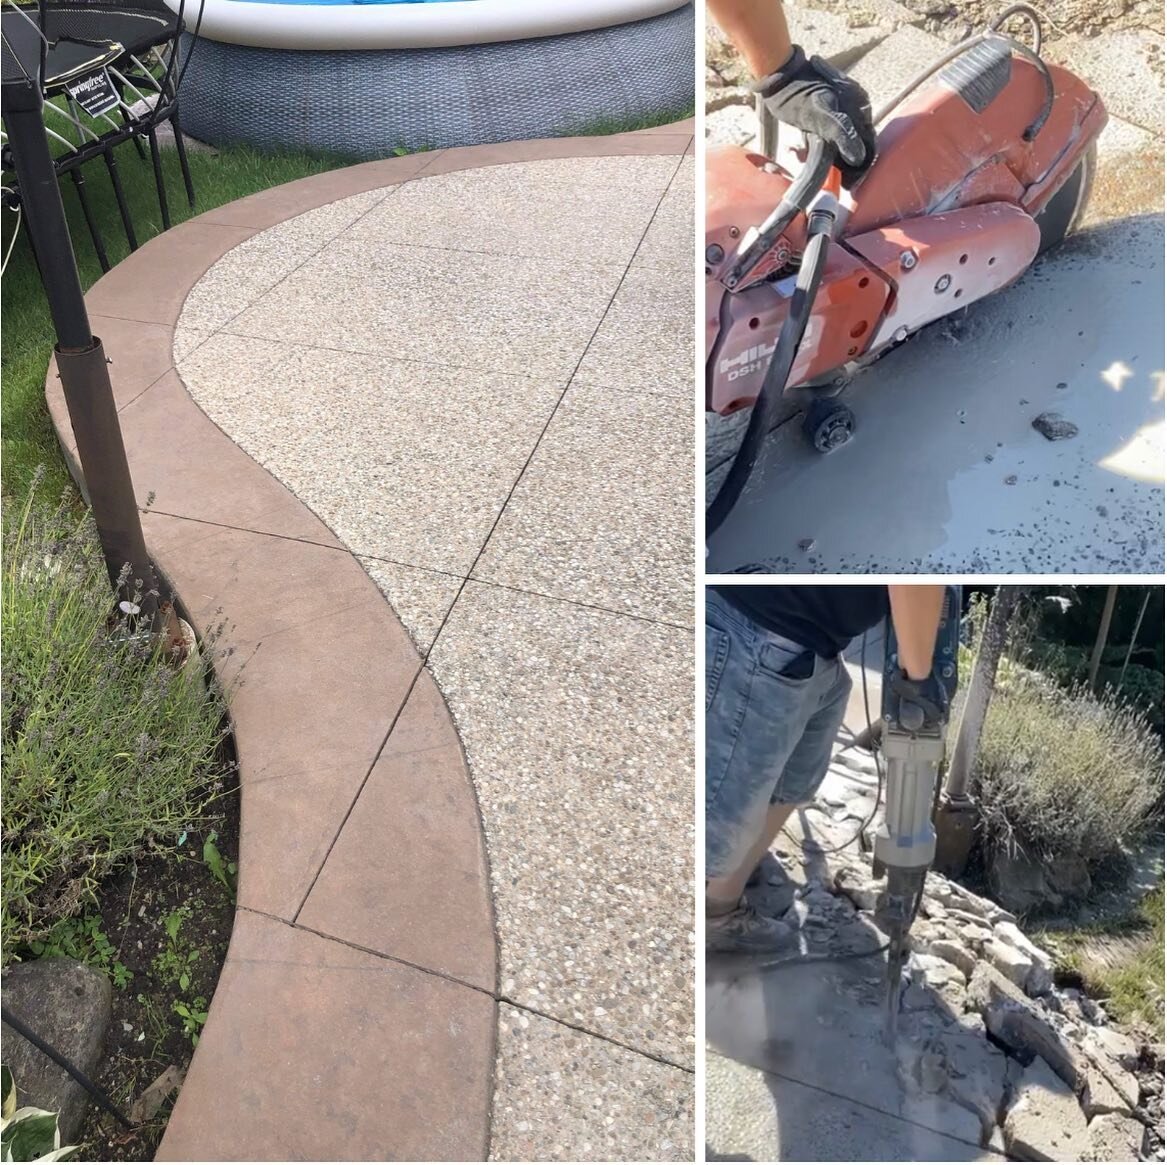 This customer wanted this half moon portion of his concrete slab removed. So we Cut, jackhammered, and removed all material. 💪🏼 #demolition #demo #renovations #renovation #hamilton #hamiltonrenovation #hamiltonrealestate #hamiltonrealtor #hamiltonp